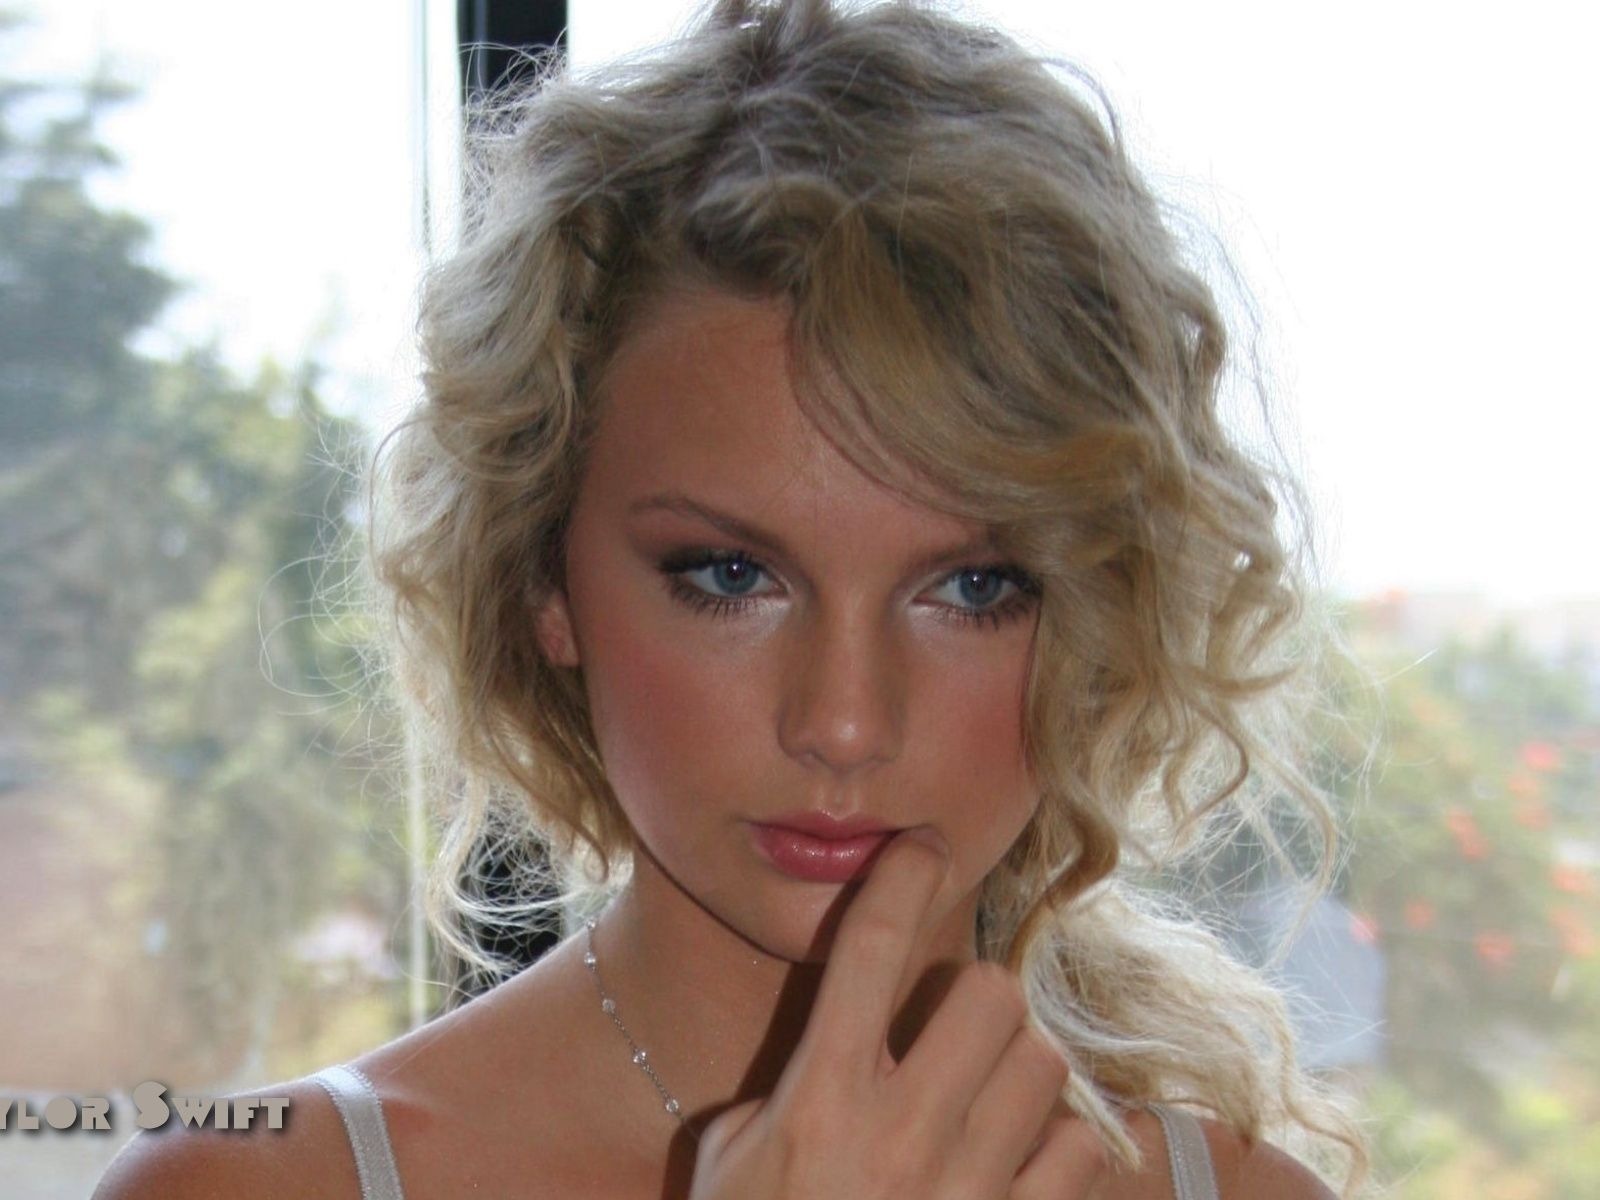 Taylor Swift #074 - 1600x1200 Wallpapers Pictures Photos Images